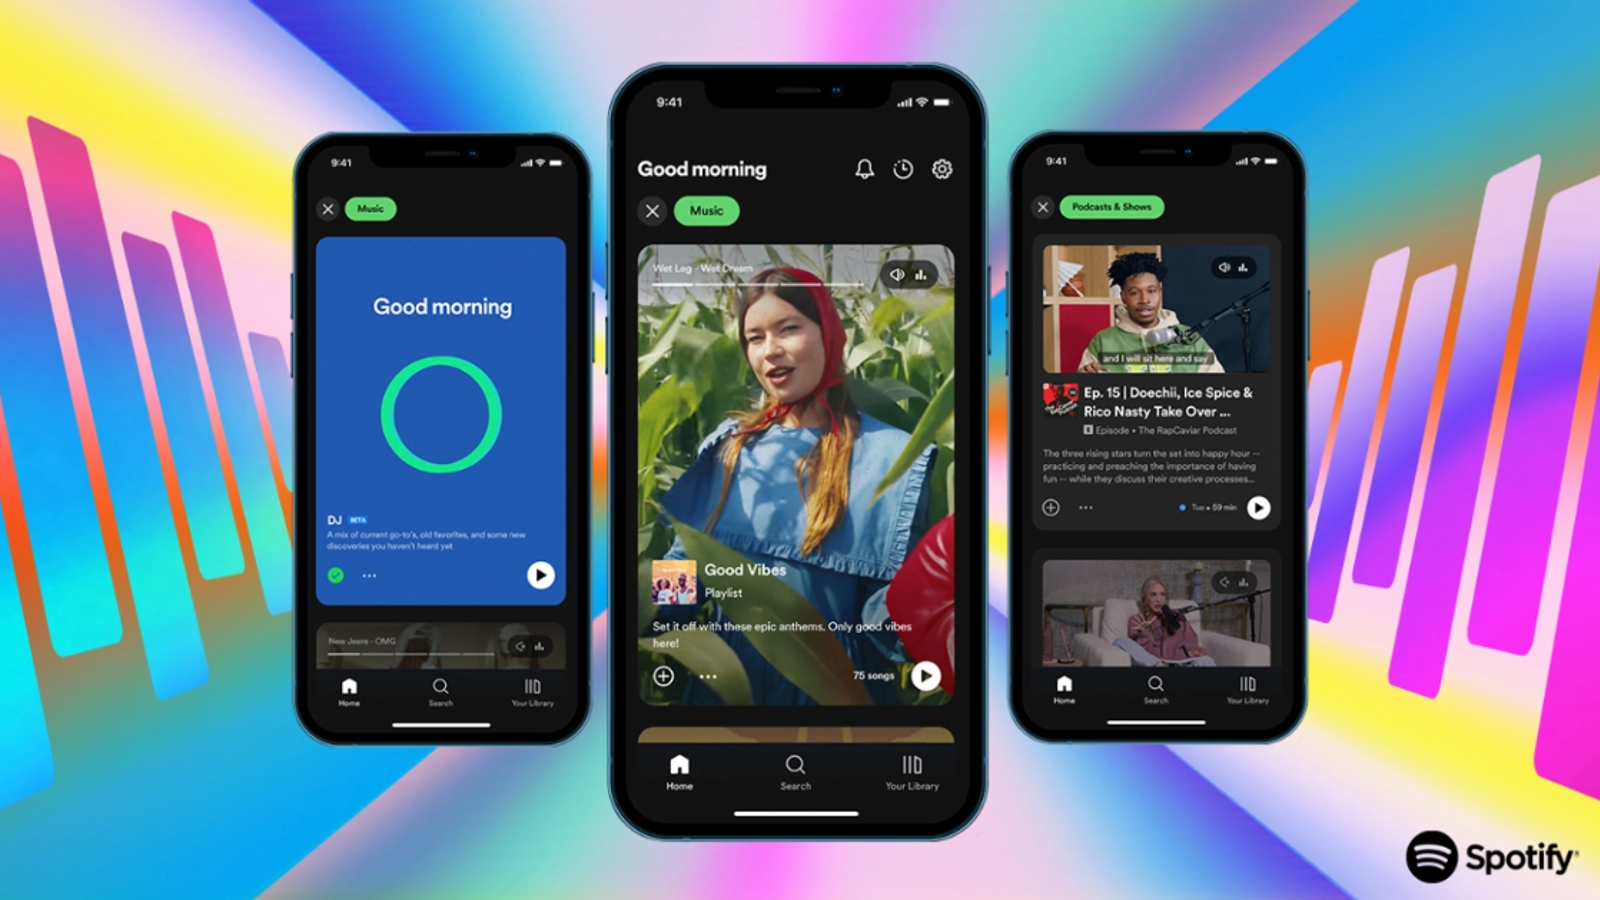 Spotify update isn’t going well – why are so many apps using the same skin?  |  Science & Tech News